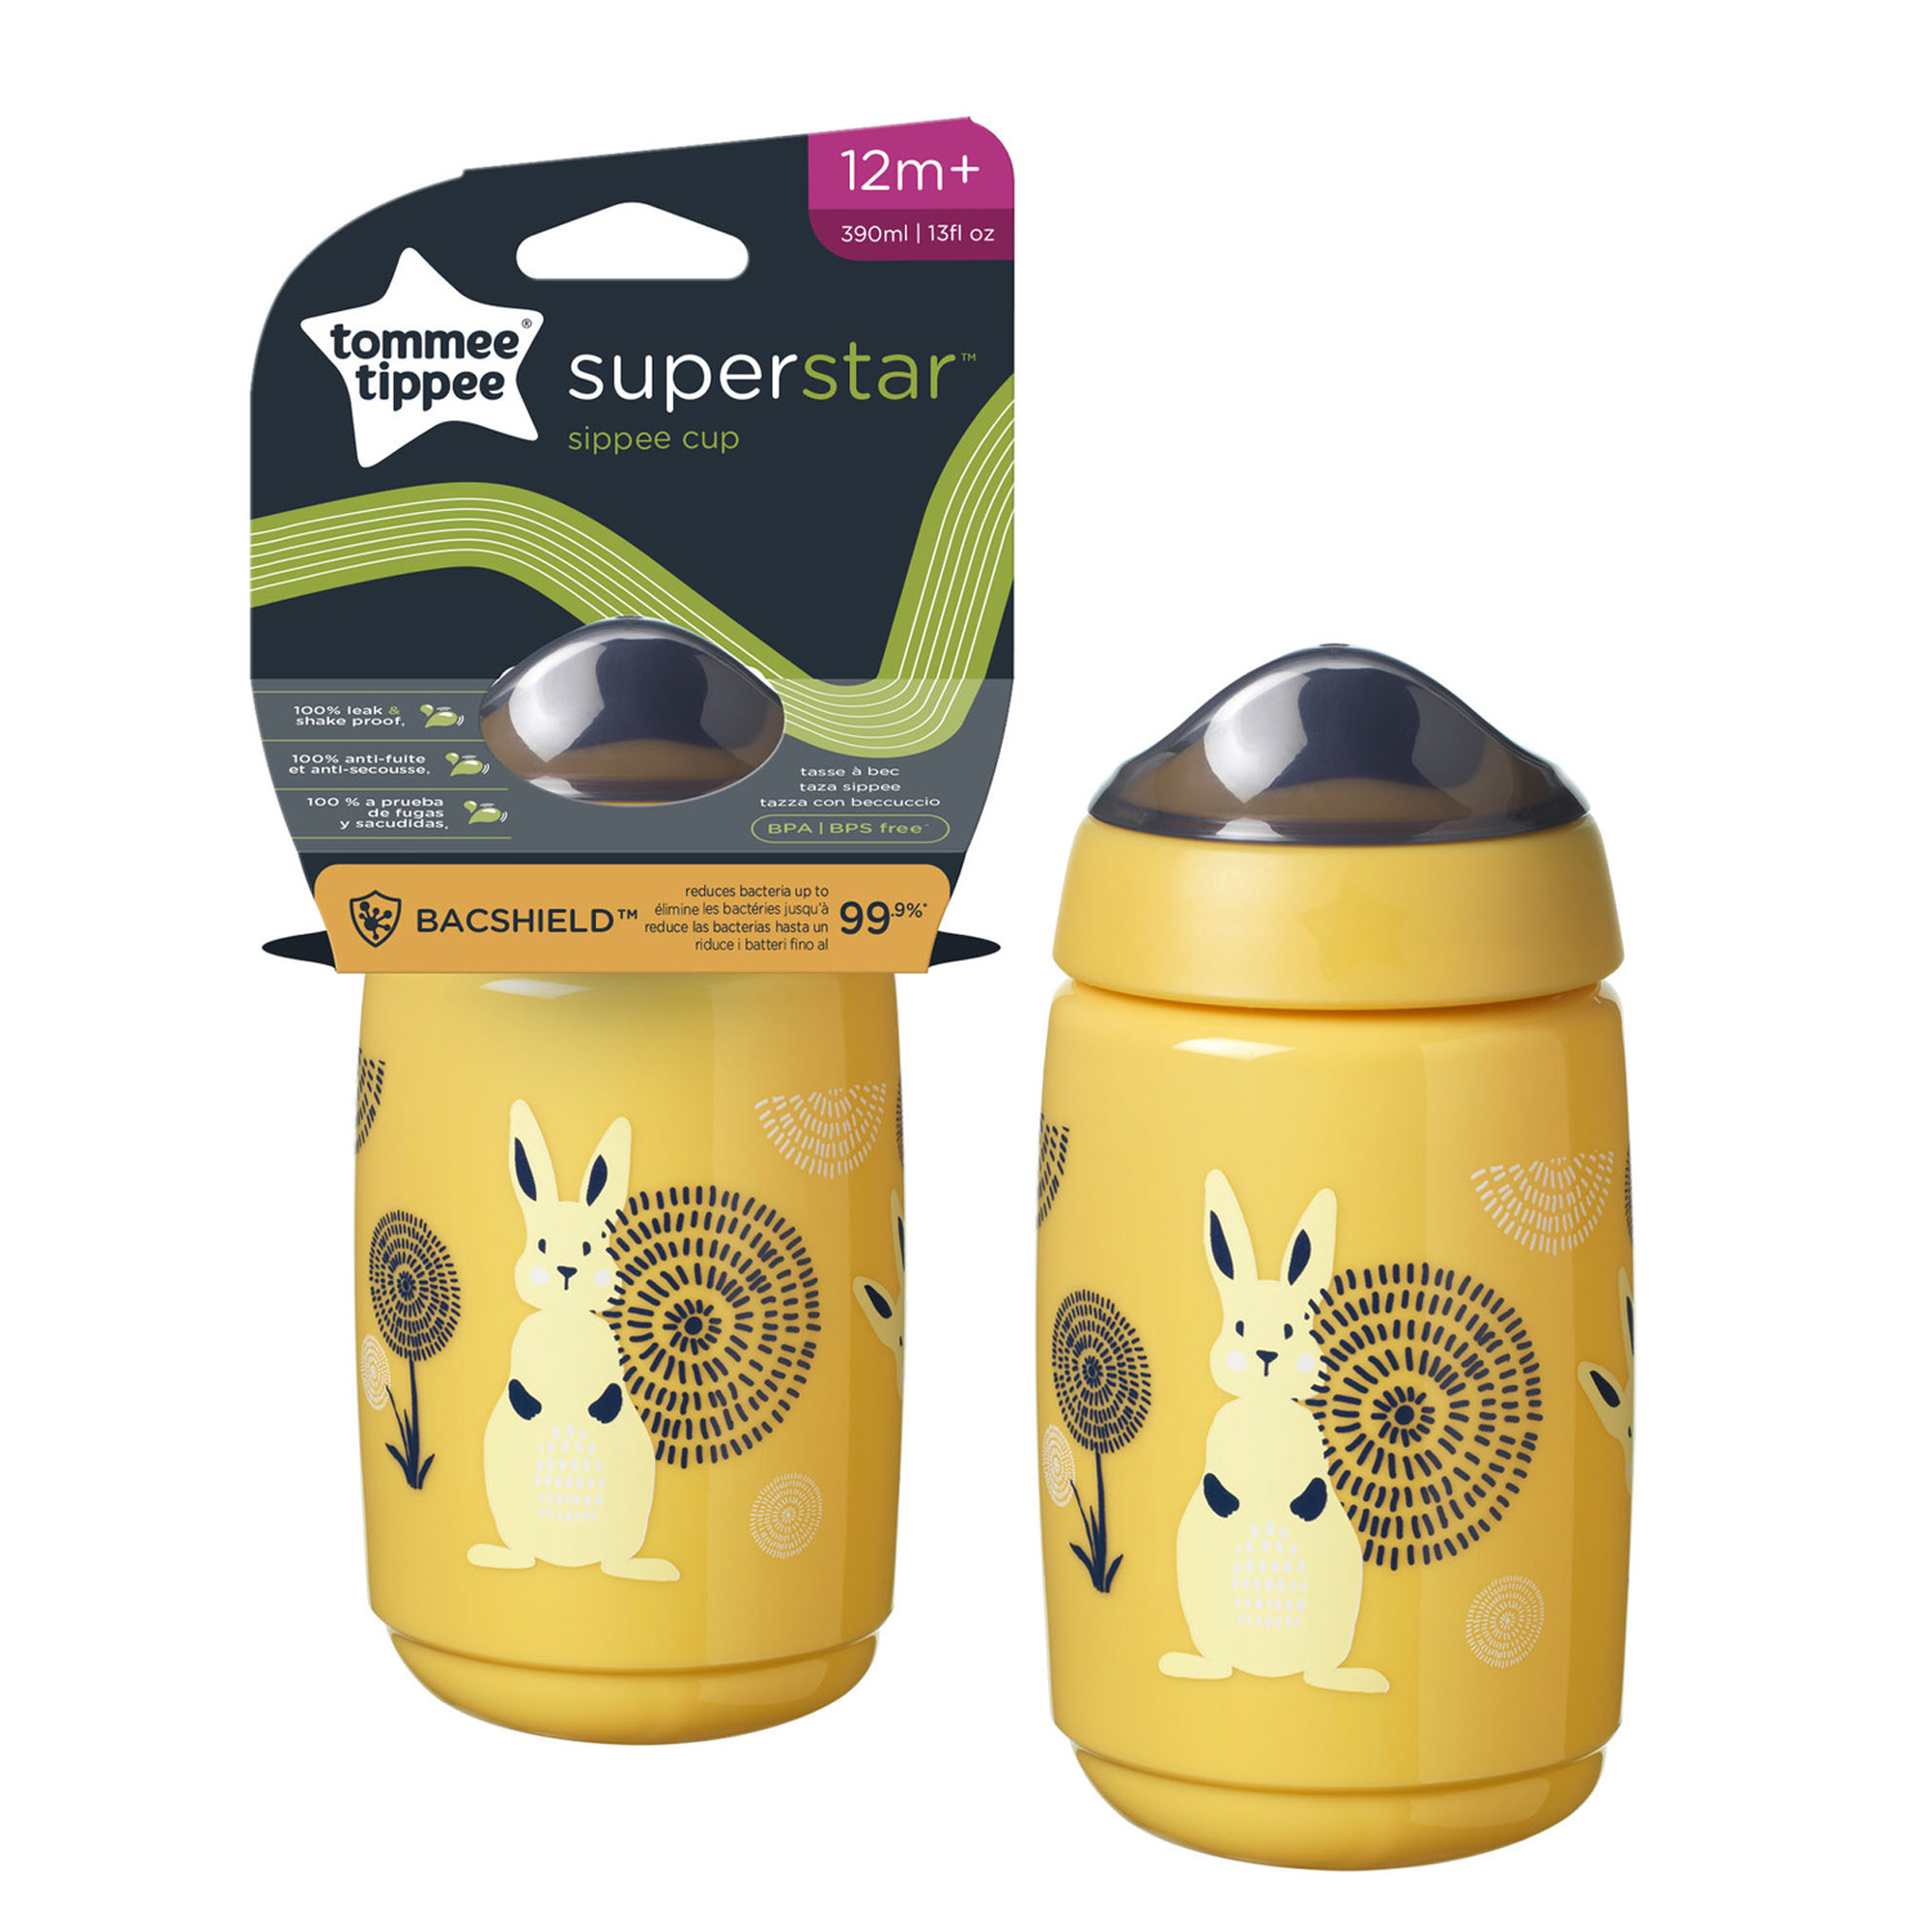 Cana Tommee Tippee Sippee cu protectie BACSHIELD si capac, 390 ml, 12 luni +, Galben, 1 buc